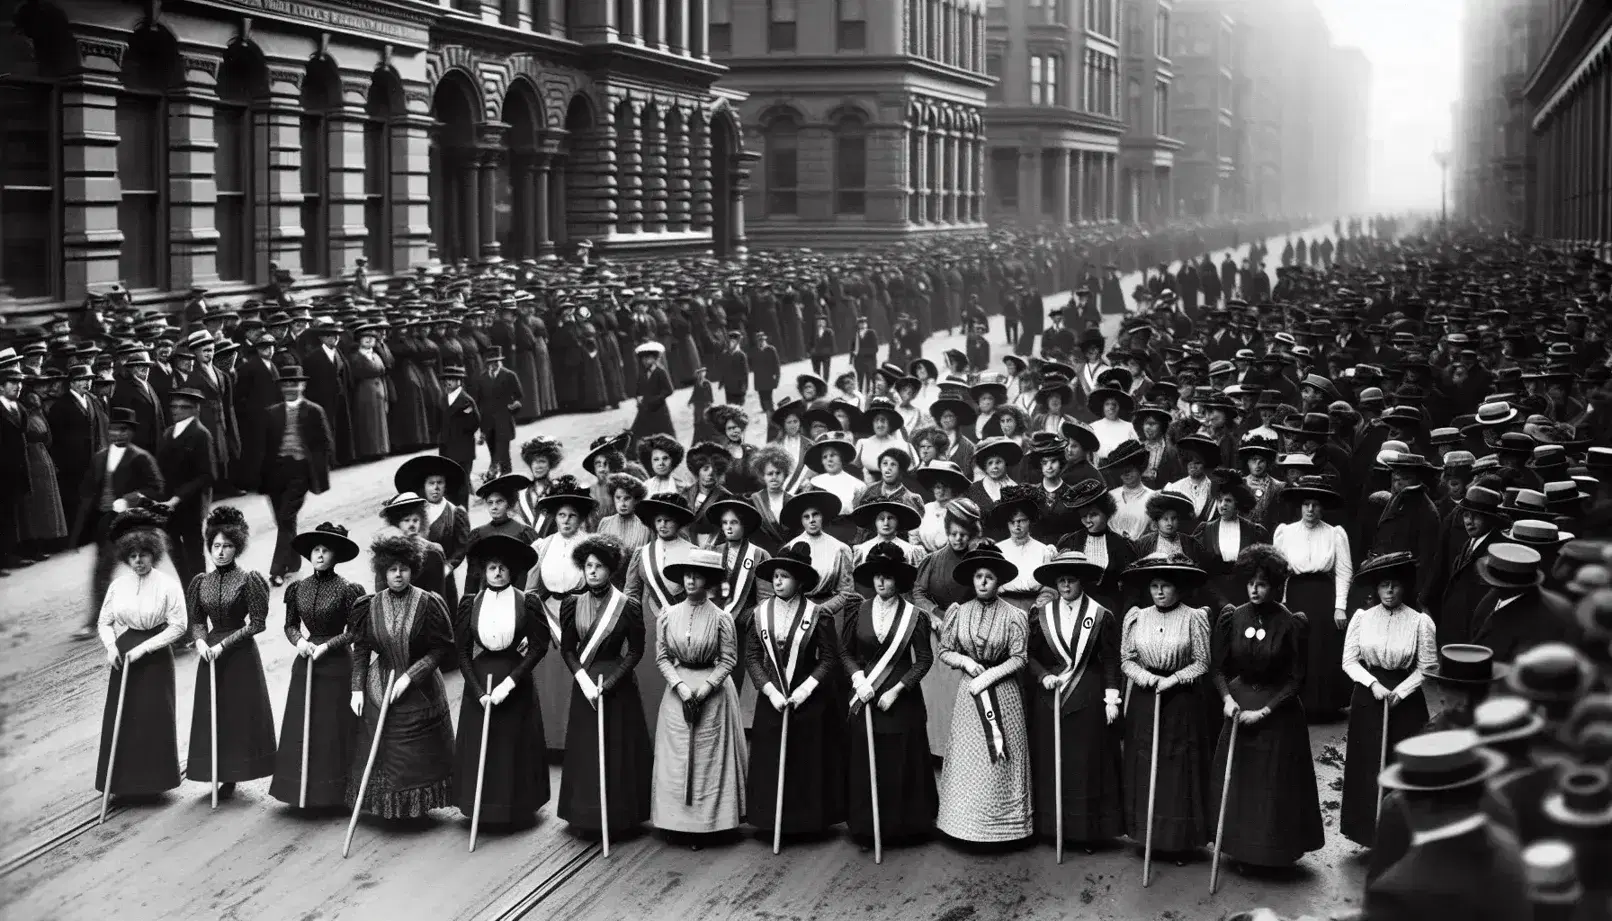 Women marching for women's suffrage, dressed in early 20th century clothing, with wide-brimmed hats and banners, in a historic black and white photo.